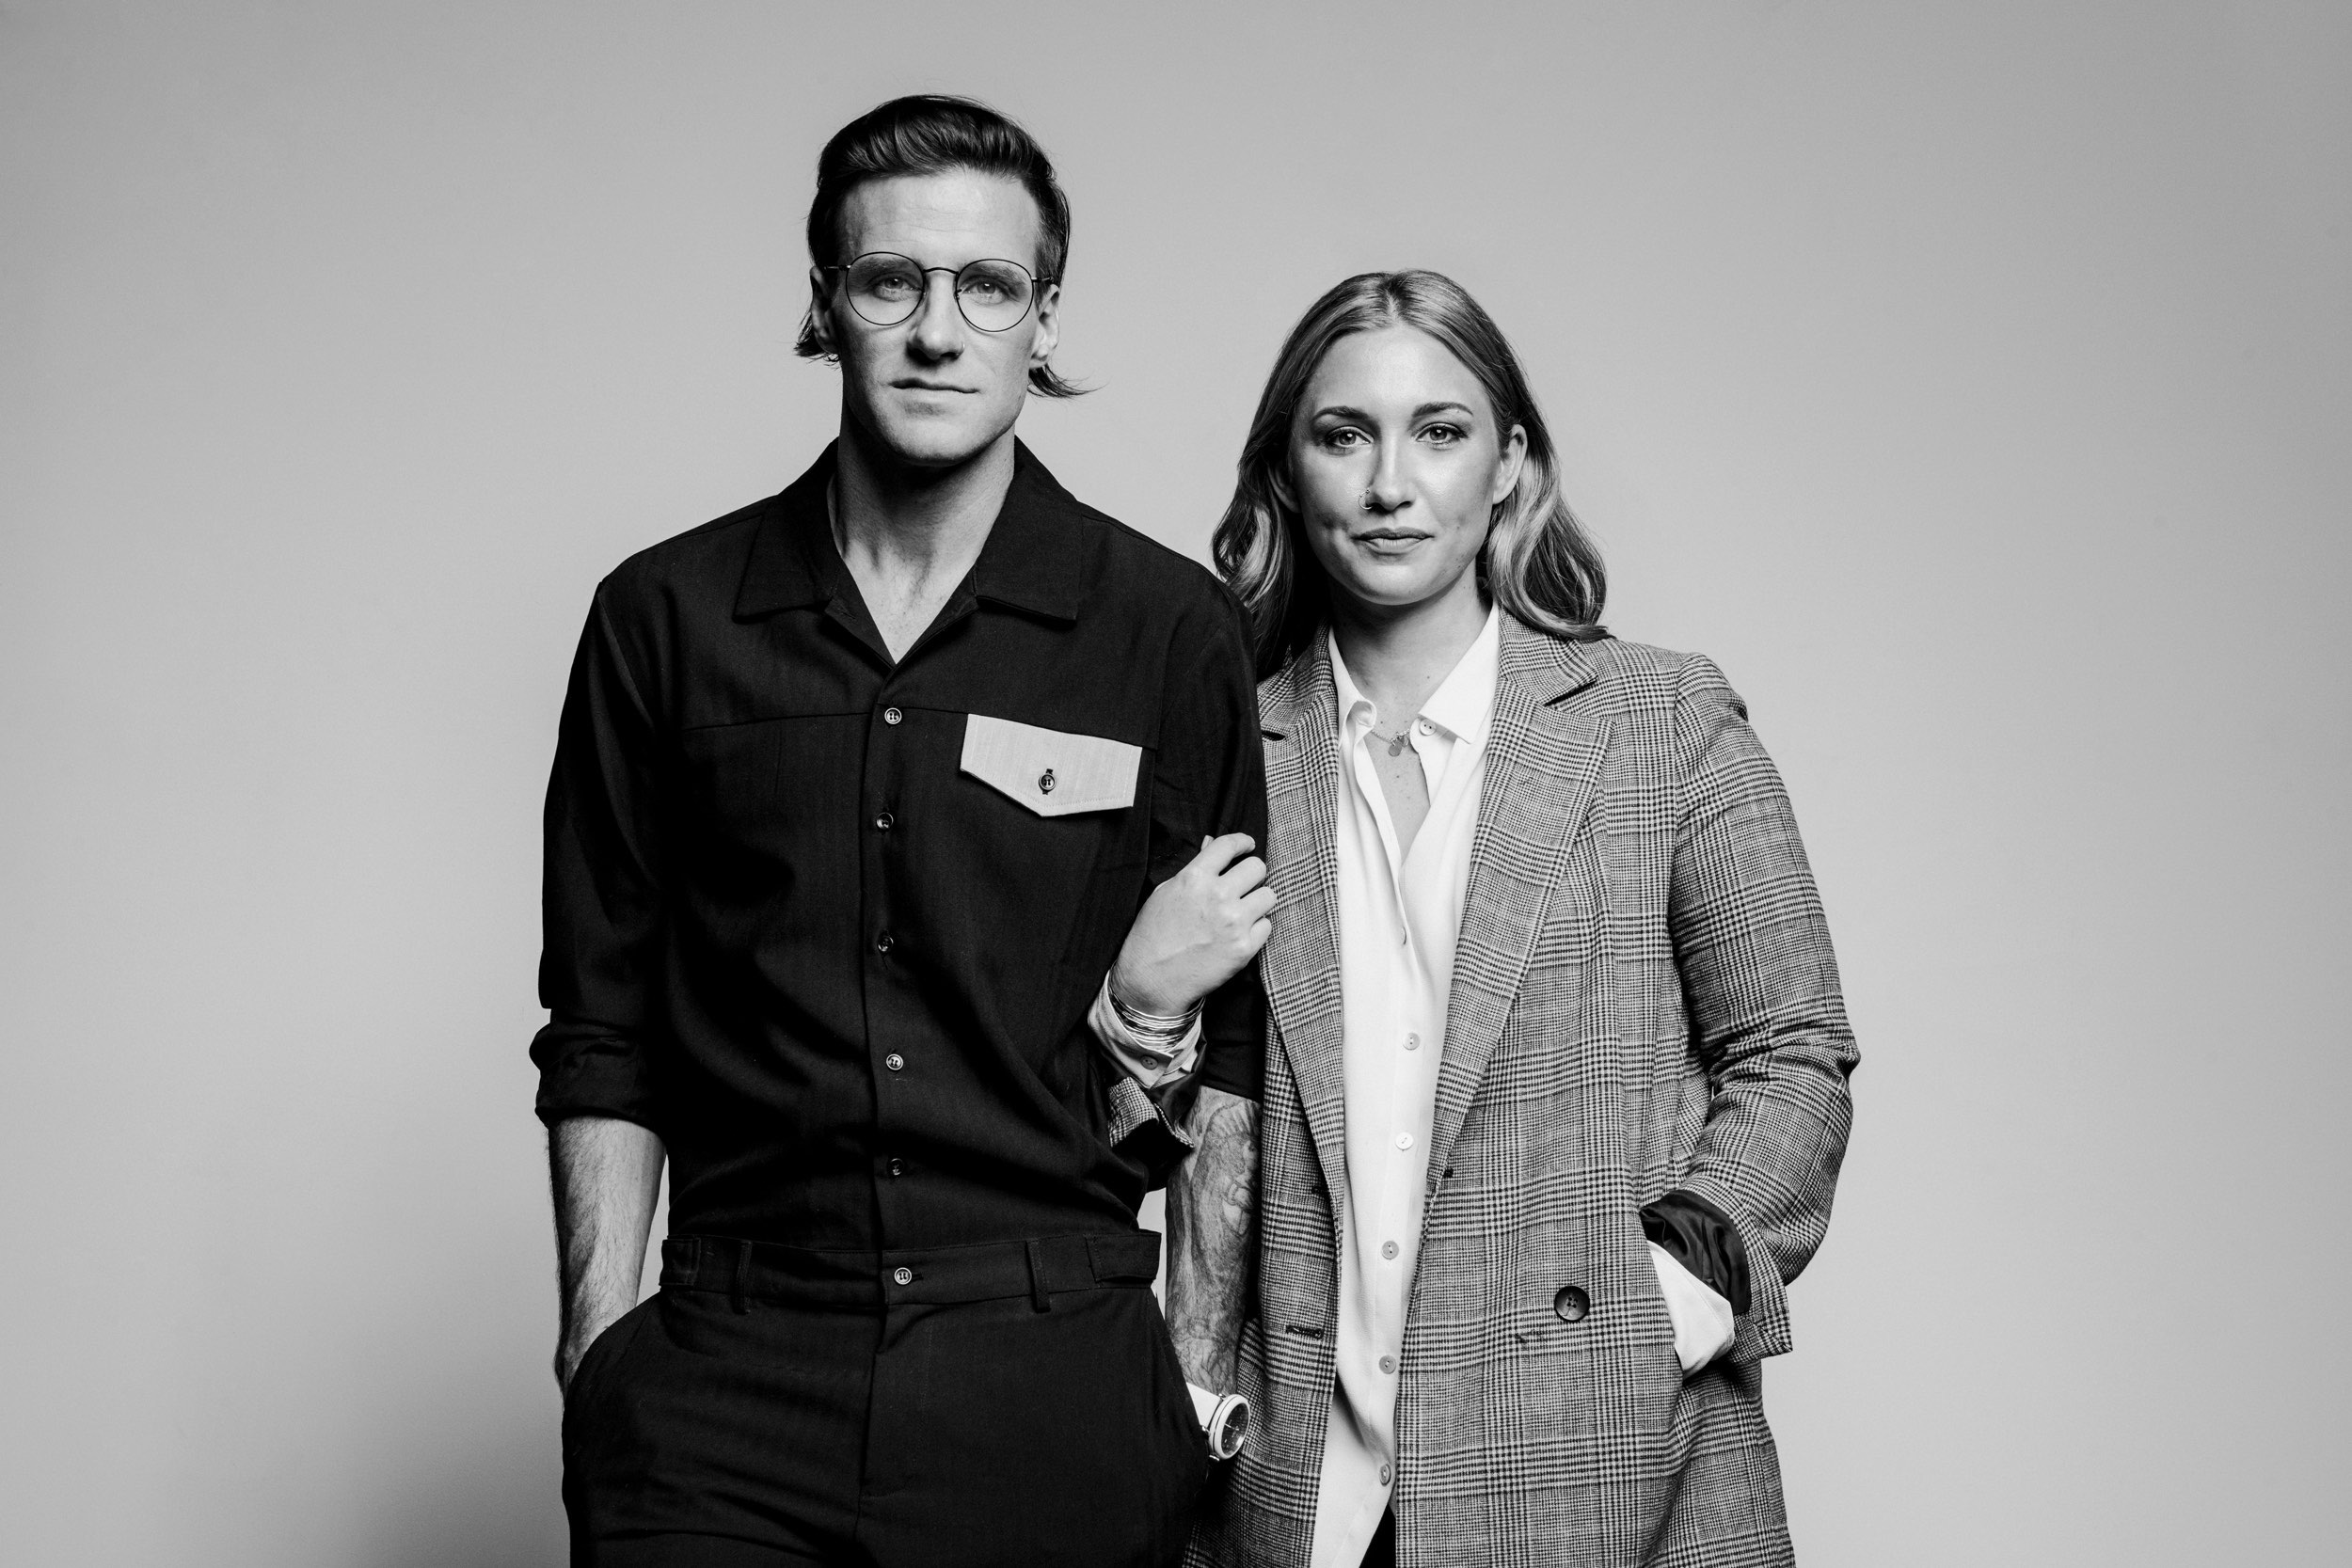  William and Charis Retherford, Founders of Citizens Of Sound Photographed by Tony Li